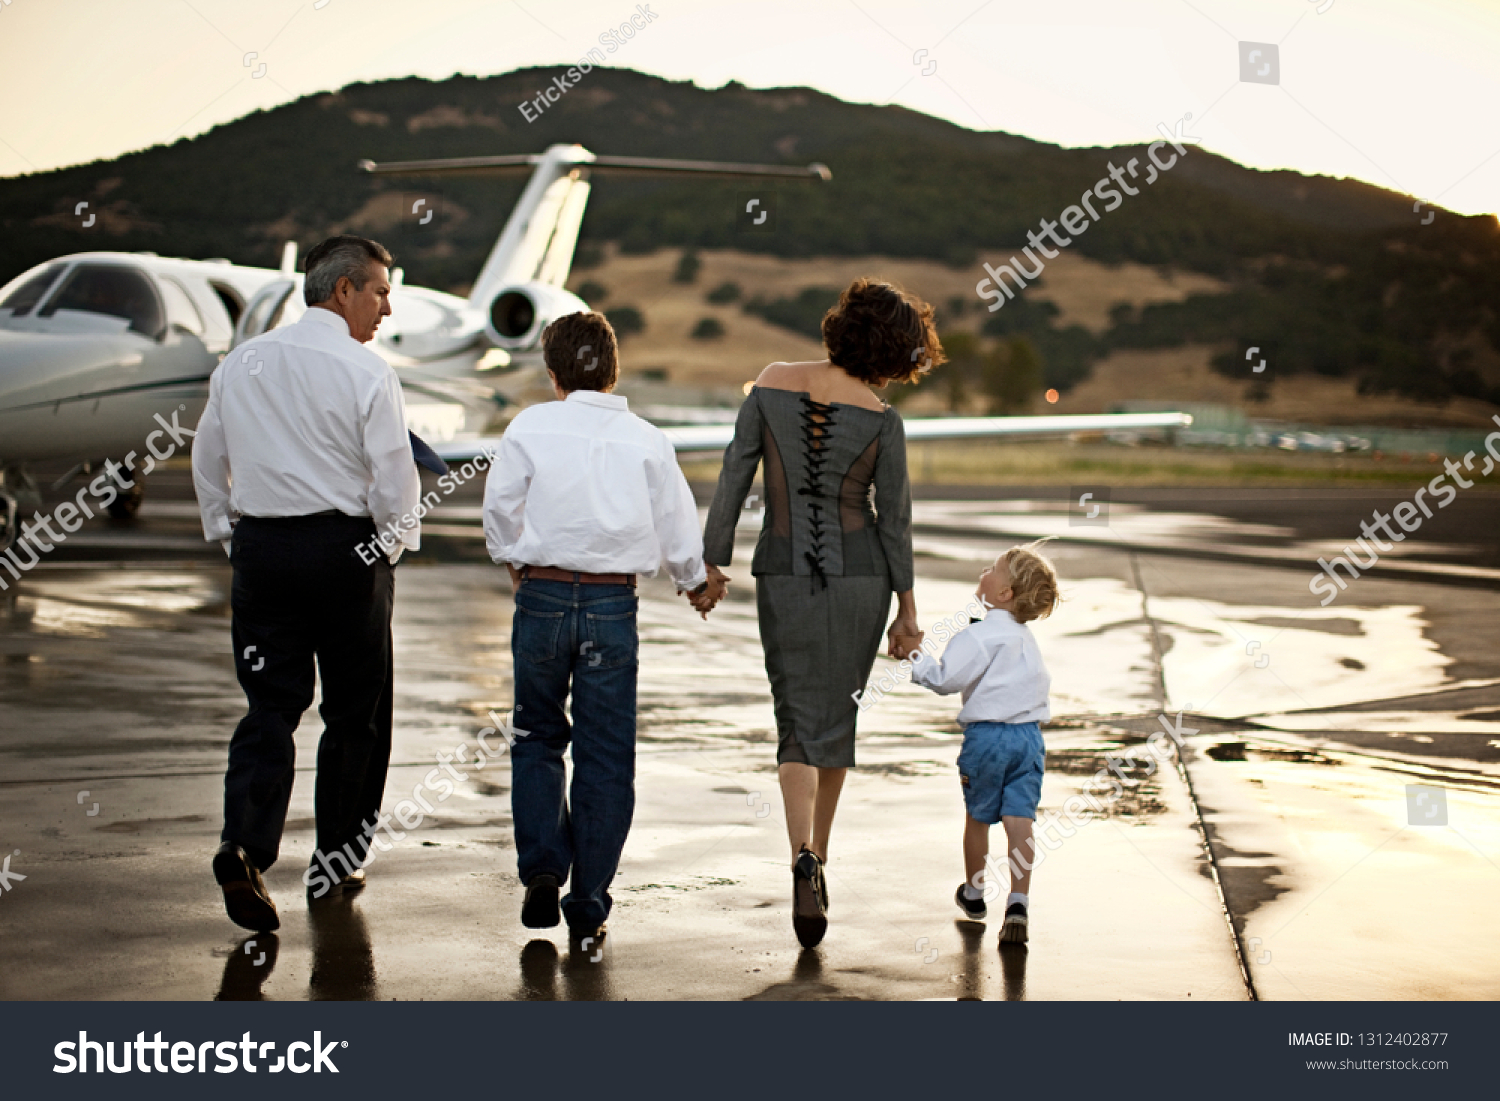 Family walking towards a private jet holding hands #1312402877